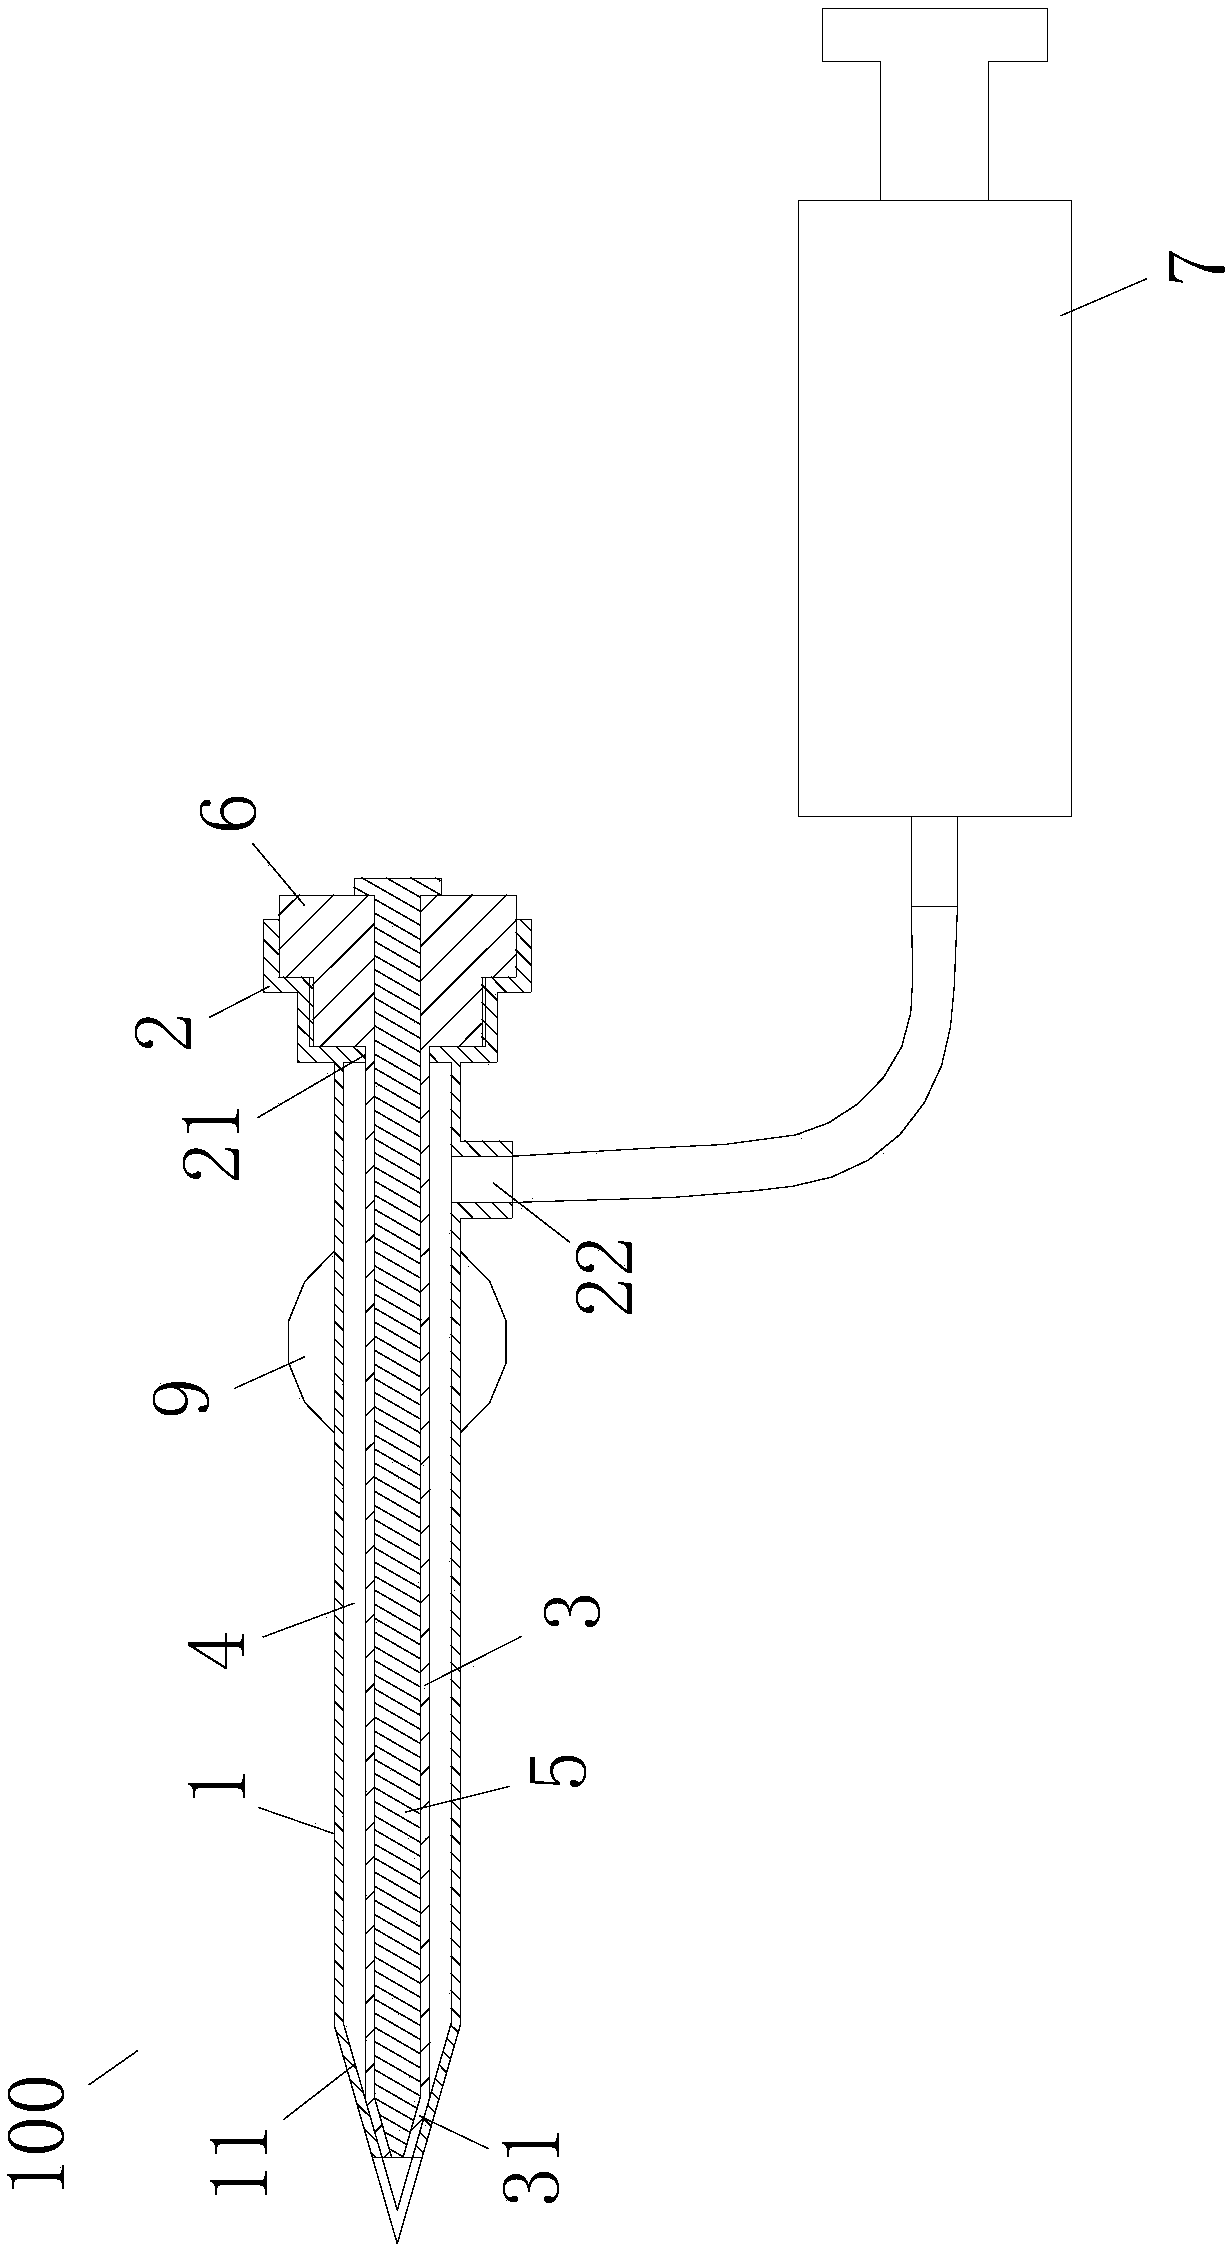 Medical mechanism for auripuncture and intratympanic injection